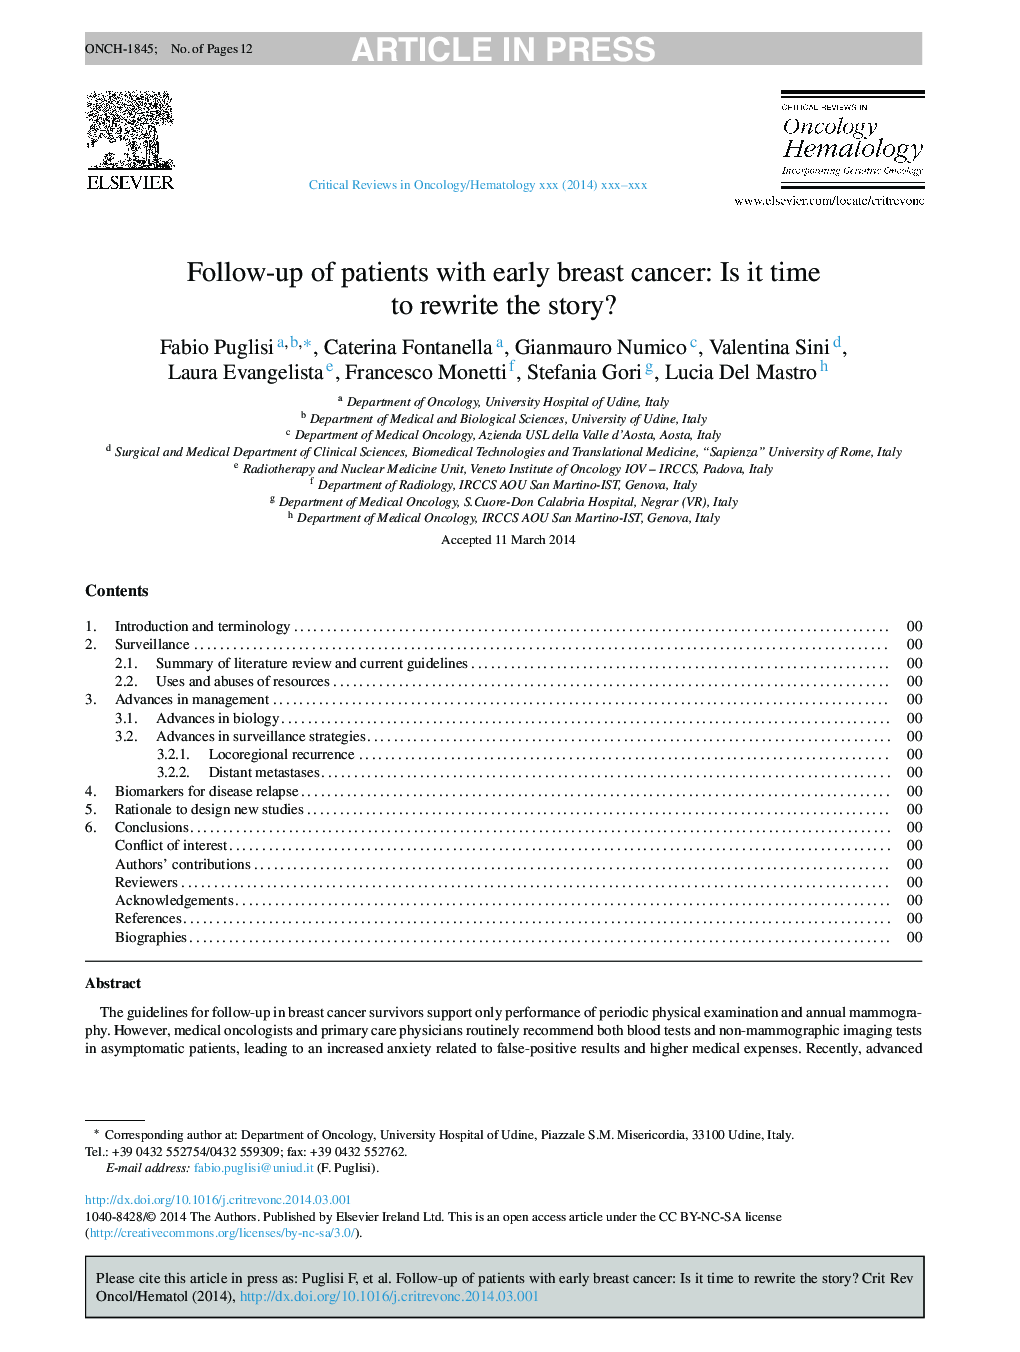 Follow-up of patients with early breast cancer: Is it time to rewrite the story?